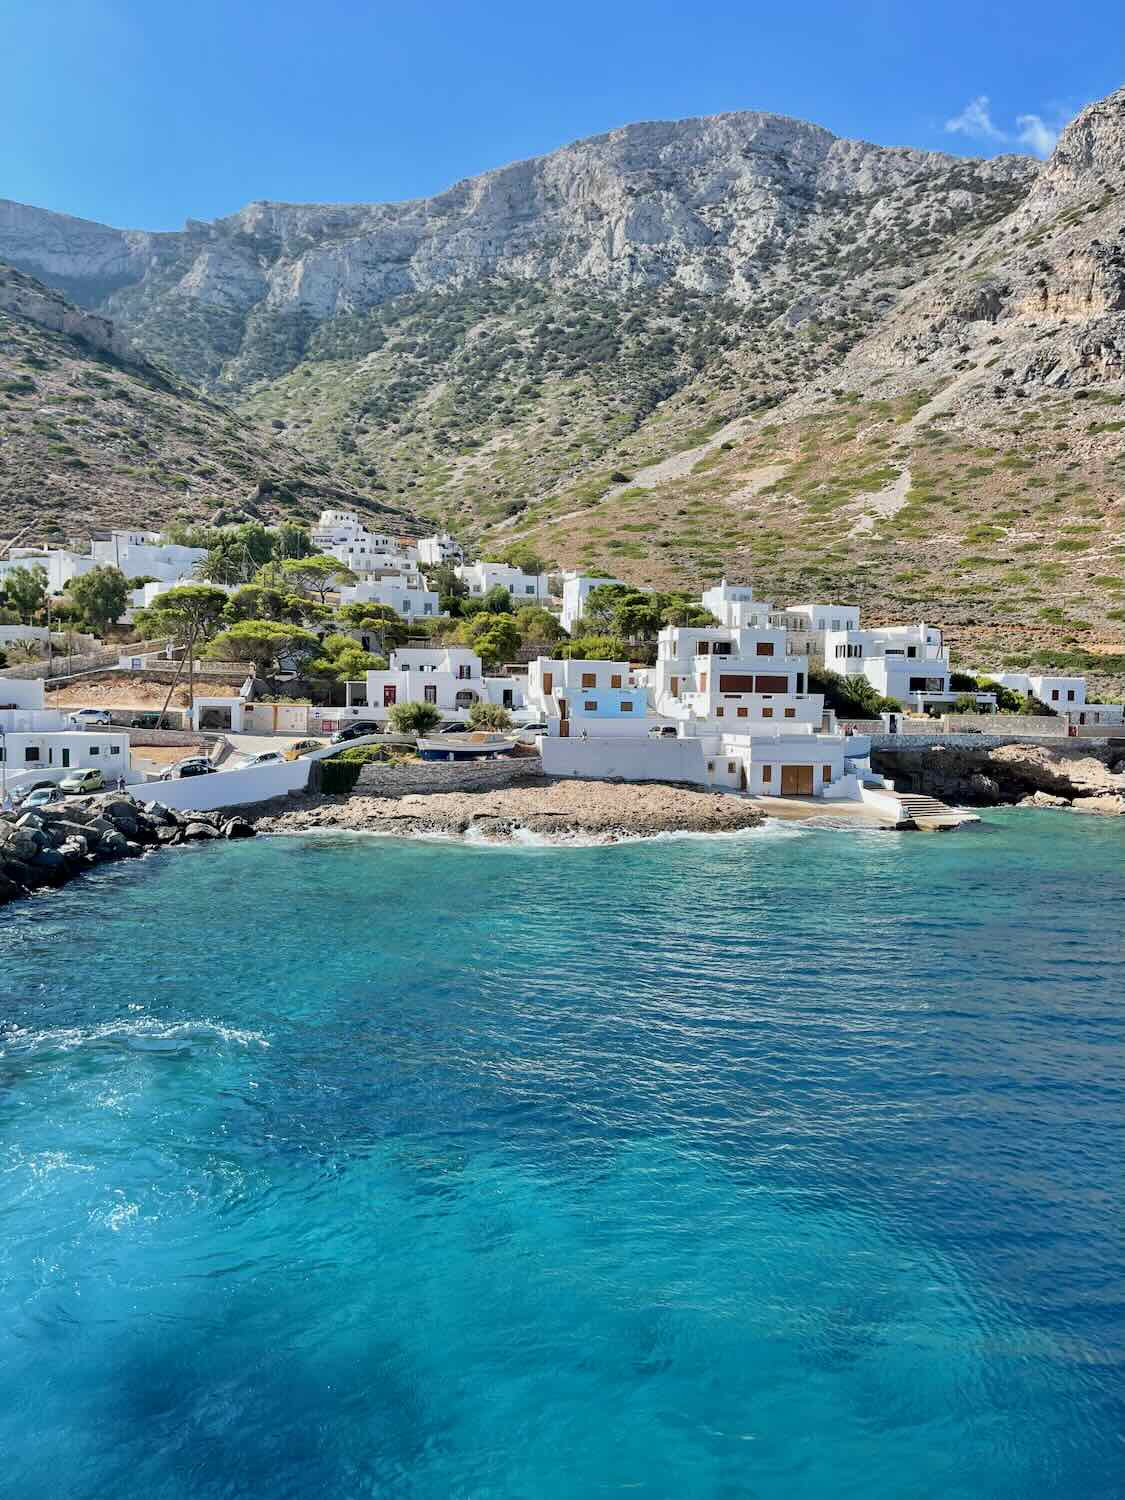 he picturesque port of Sifnos, with white buildings against a backdrop of rugged mountains and the clear Aegean Sea.